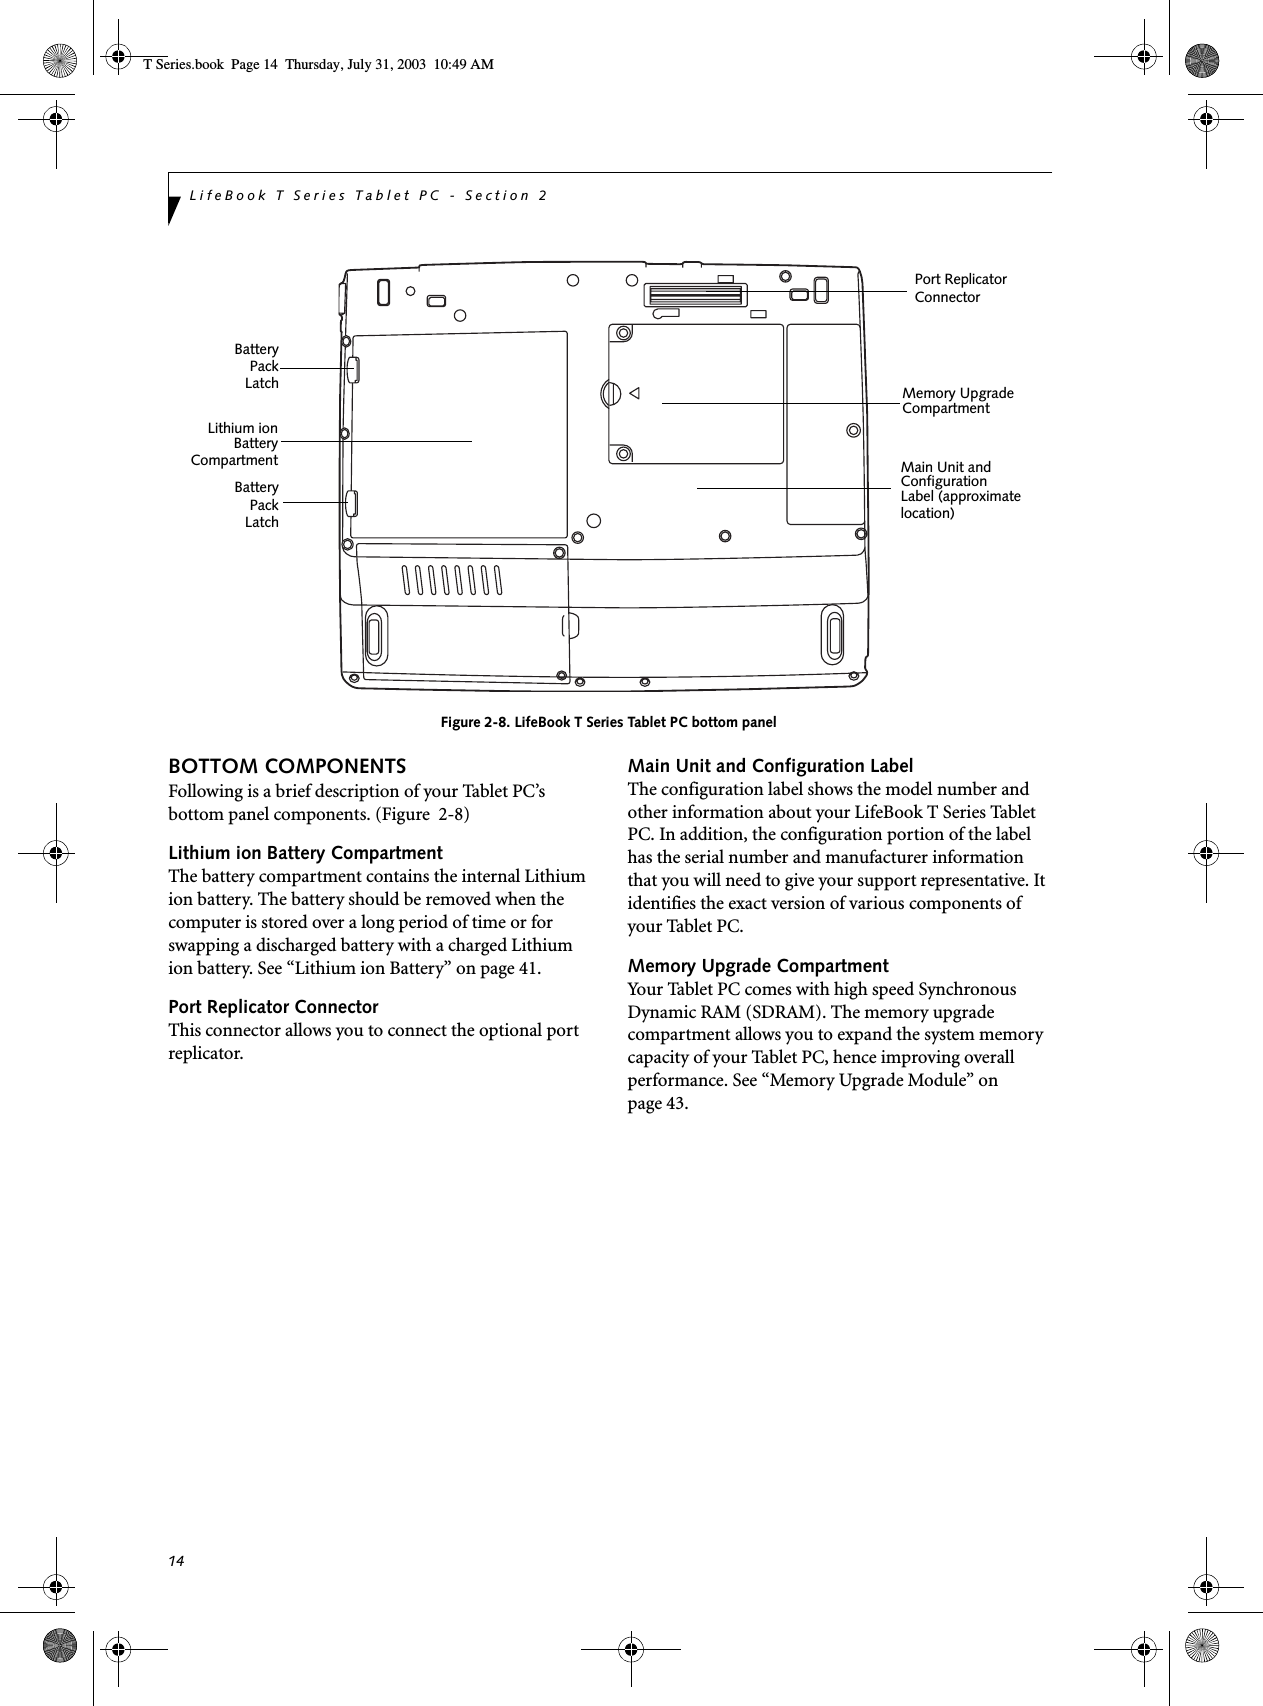 14LifeBook T Series Tablet PC - Section 2Figure 2-8. LifeBook T Series Tablet PC bottom panelBOTTOM COMPONENTSFollowing is a brief description of your Tablet PC’s bottom panel components. (Figure  2-8)Lithium ion Battery CompartmentThe battery compartment contains the internal Lithium ion battery. The battery should be removed when the computer is stored over a long period of time or for swapping a discharged battery with a charged Lithium ion battery. See “Lithium ion Battery” on page 41.Port Replicator ConnectorThis connector allows you to connect the optional port replicator. Main Unit and Configuration LabelThe configuration label shows the model number and other information about your LifeBook T Series Tablet PC. In addition, the configuration portion of the label has the serial number and manufacturer information that you will need to give your support representative. It identifies the exact version of various components of your Tablet PC. Memory Upgrade CompartmentYour Tablet PC comes with high speed Synchronous Dynamic RAM (SDRAM). The memory upgrade compartment allows you to expand the system memory capacity of your Tablet PC, hence improving overall performance. See “Memory Upgrade Module” on page 43.Memory UpgradeCompartmentLithium ionBatteryMain Unit andConfigurationLabel (approximateBatteryPort ReplicatorConnectorlocation)PackLatchBatteryPackLatchCompartmentT Series.book  Page 14  Thursday, July 31, 2003  10:49 AM